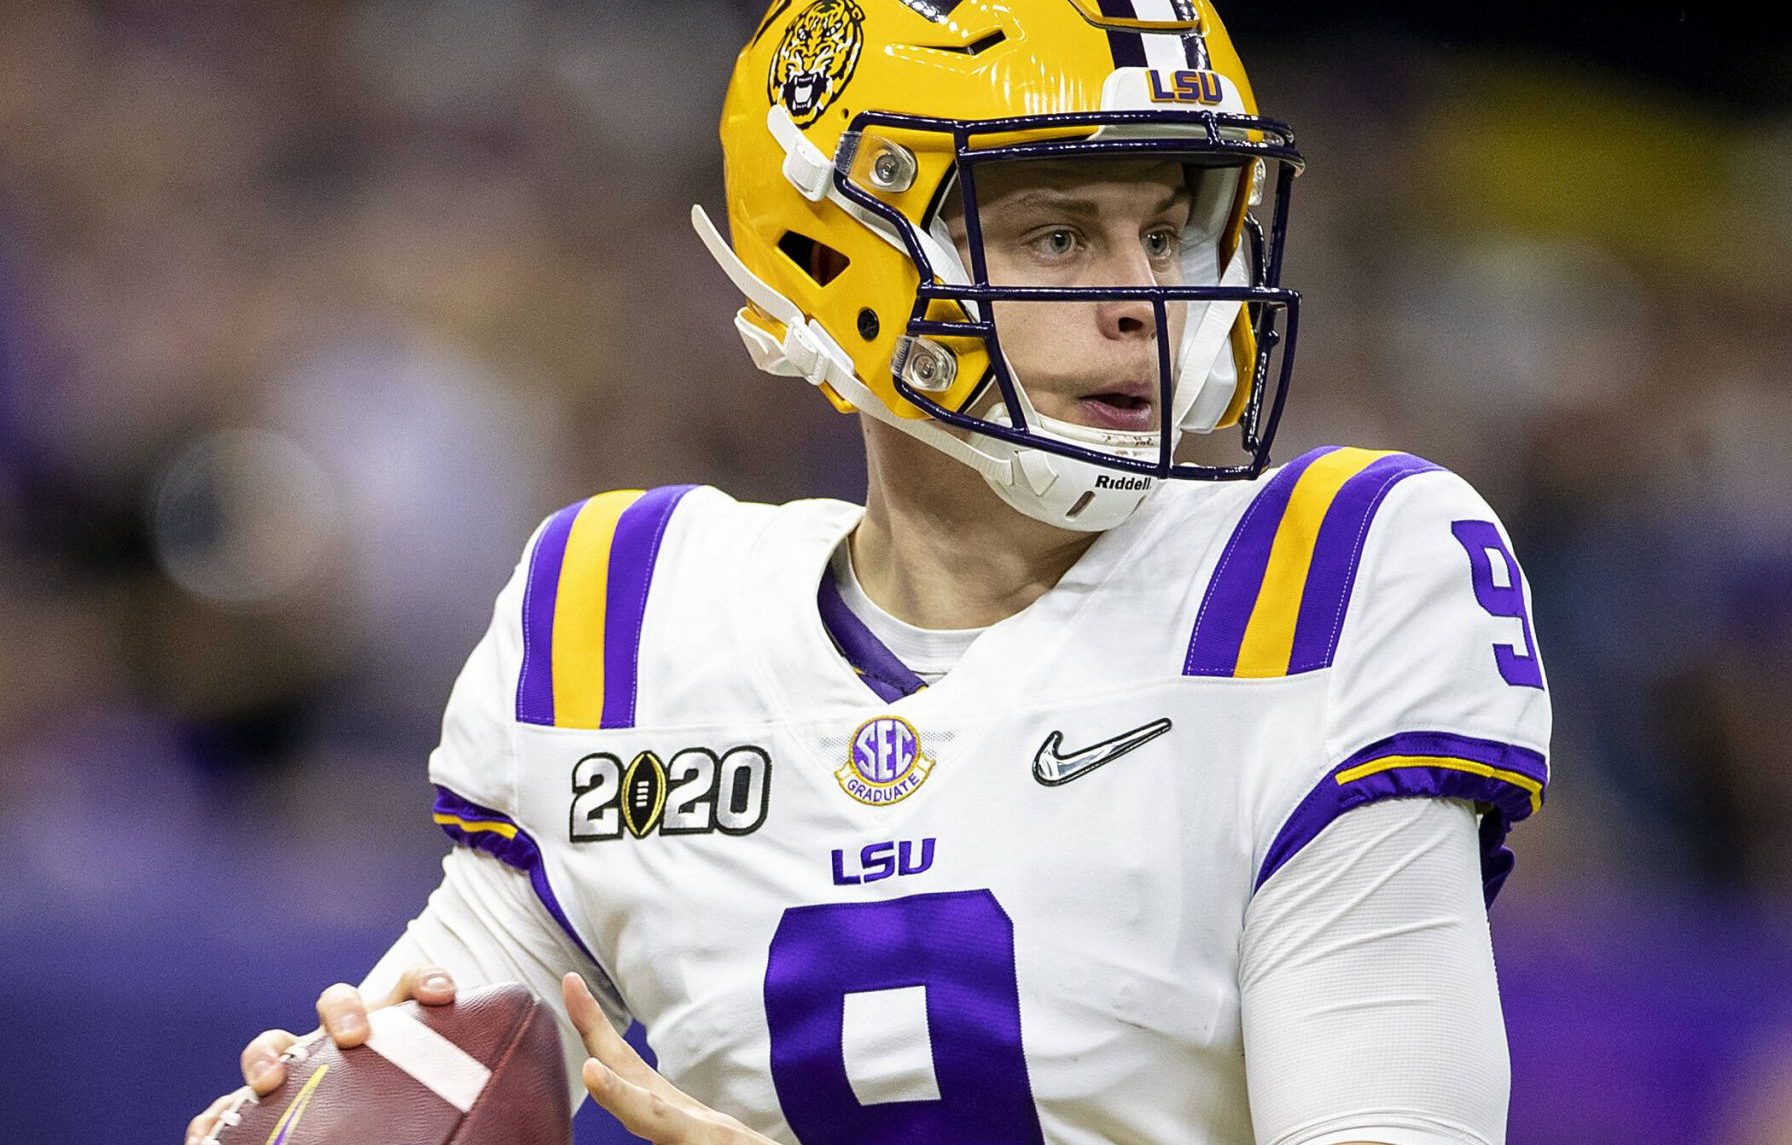 January 13, 2020: LSU quarterback Joe Burrow 9 passes the ball during College Football Playoff National Championship game action between the Clemson Tigers and the LSU Tigers at Mercedes-Benz Superdome in New Orleans, Louisiana. LSU defeated Clemson 42-25. /CSM NCAA, College League, USA Football 2020: CFP National Championship Clemson vs LSU JAN 13 PUBLICATIONxINxGERxSUIxAUTxONLY - ZUMAc04 20200113zafc04366 Copyright: xJohnxMersitsx